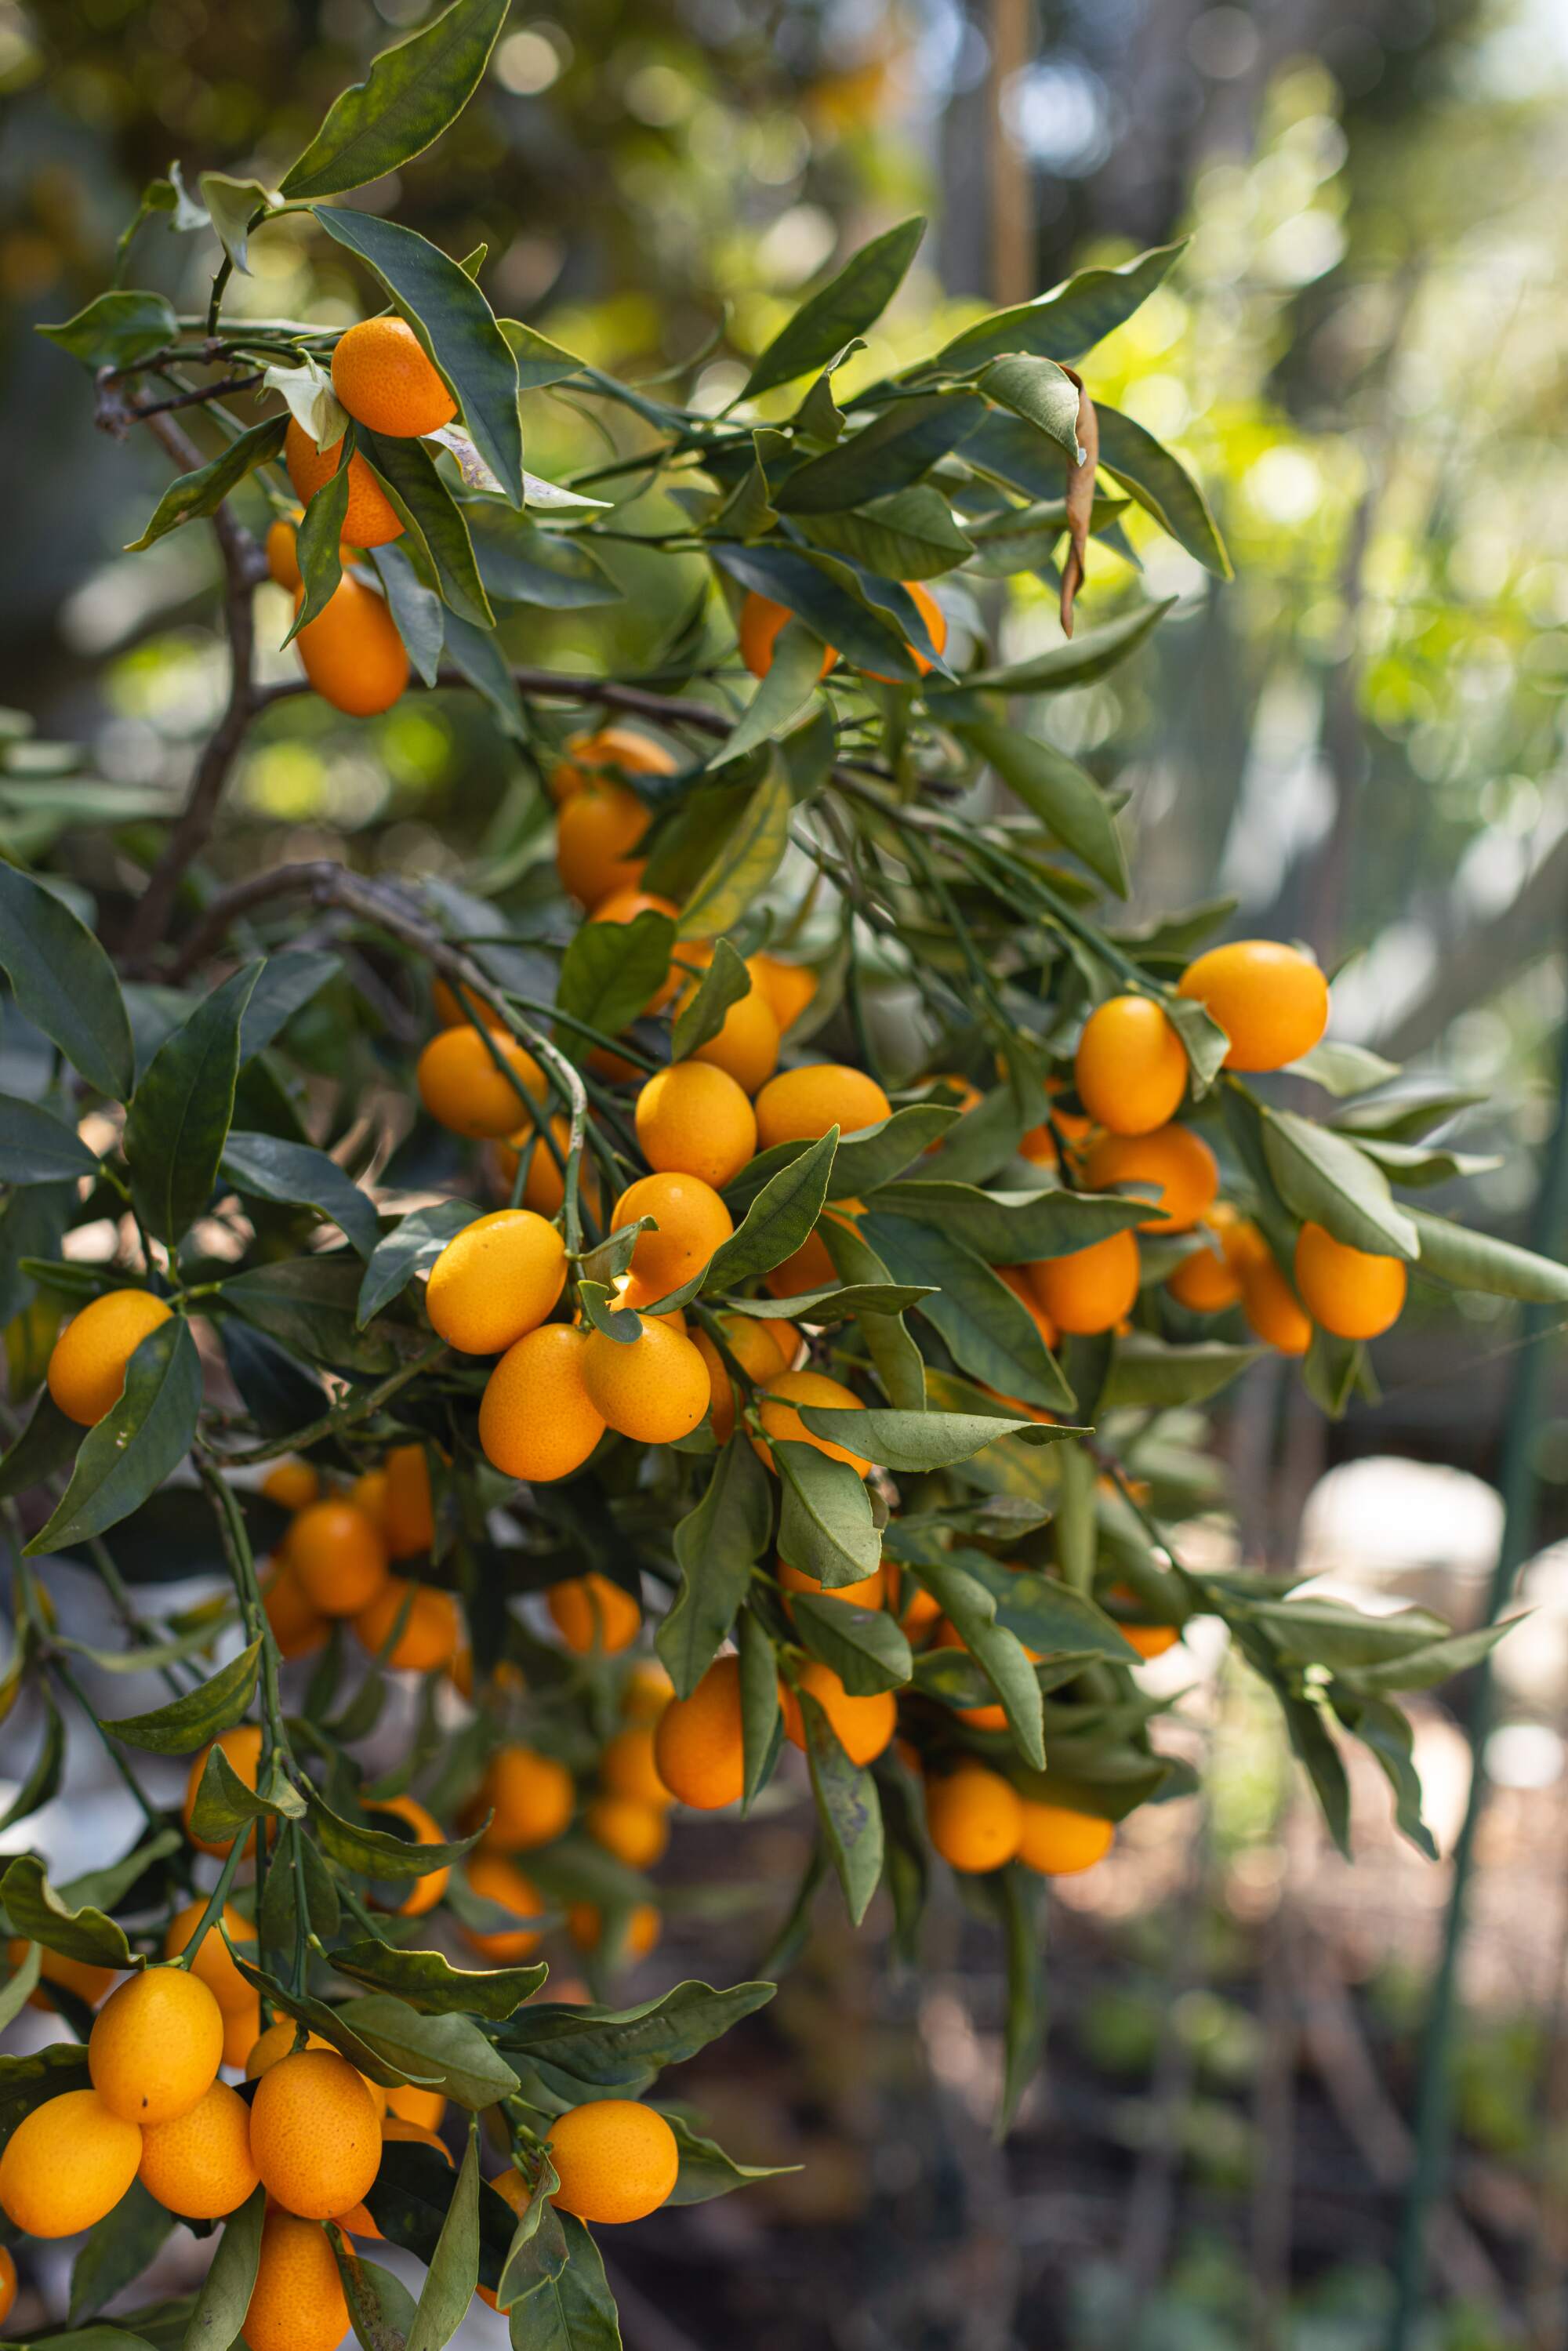 A citrus tree in the garden of chef Sara Kramer of Kismet in Los Angeles.  (Catherine Dzilenski / For The Times)